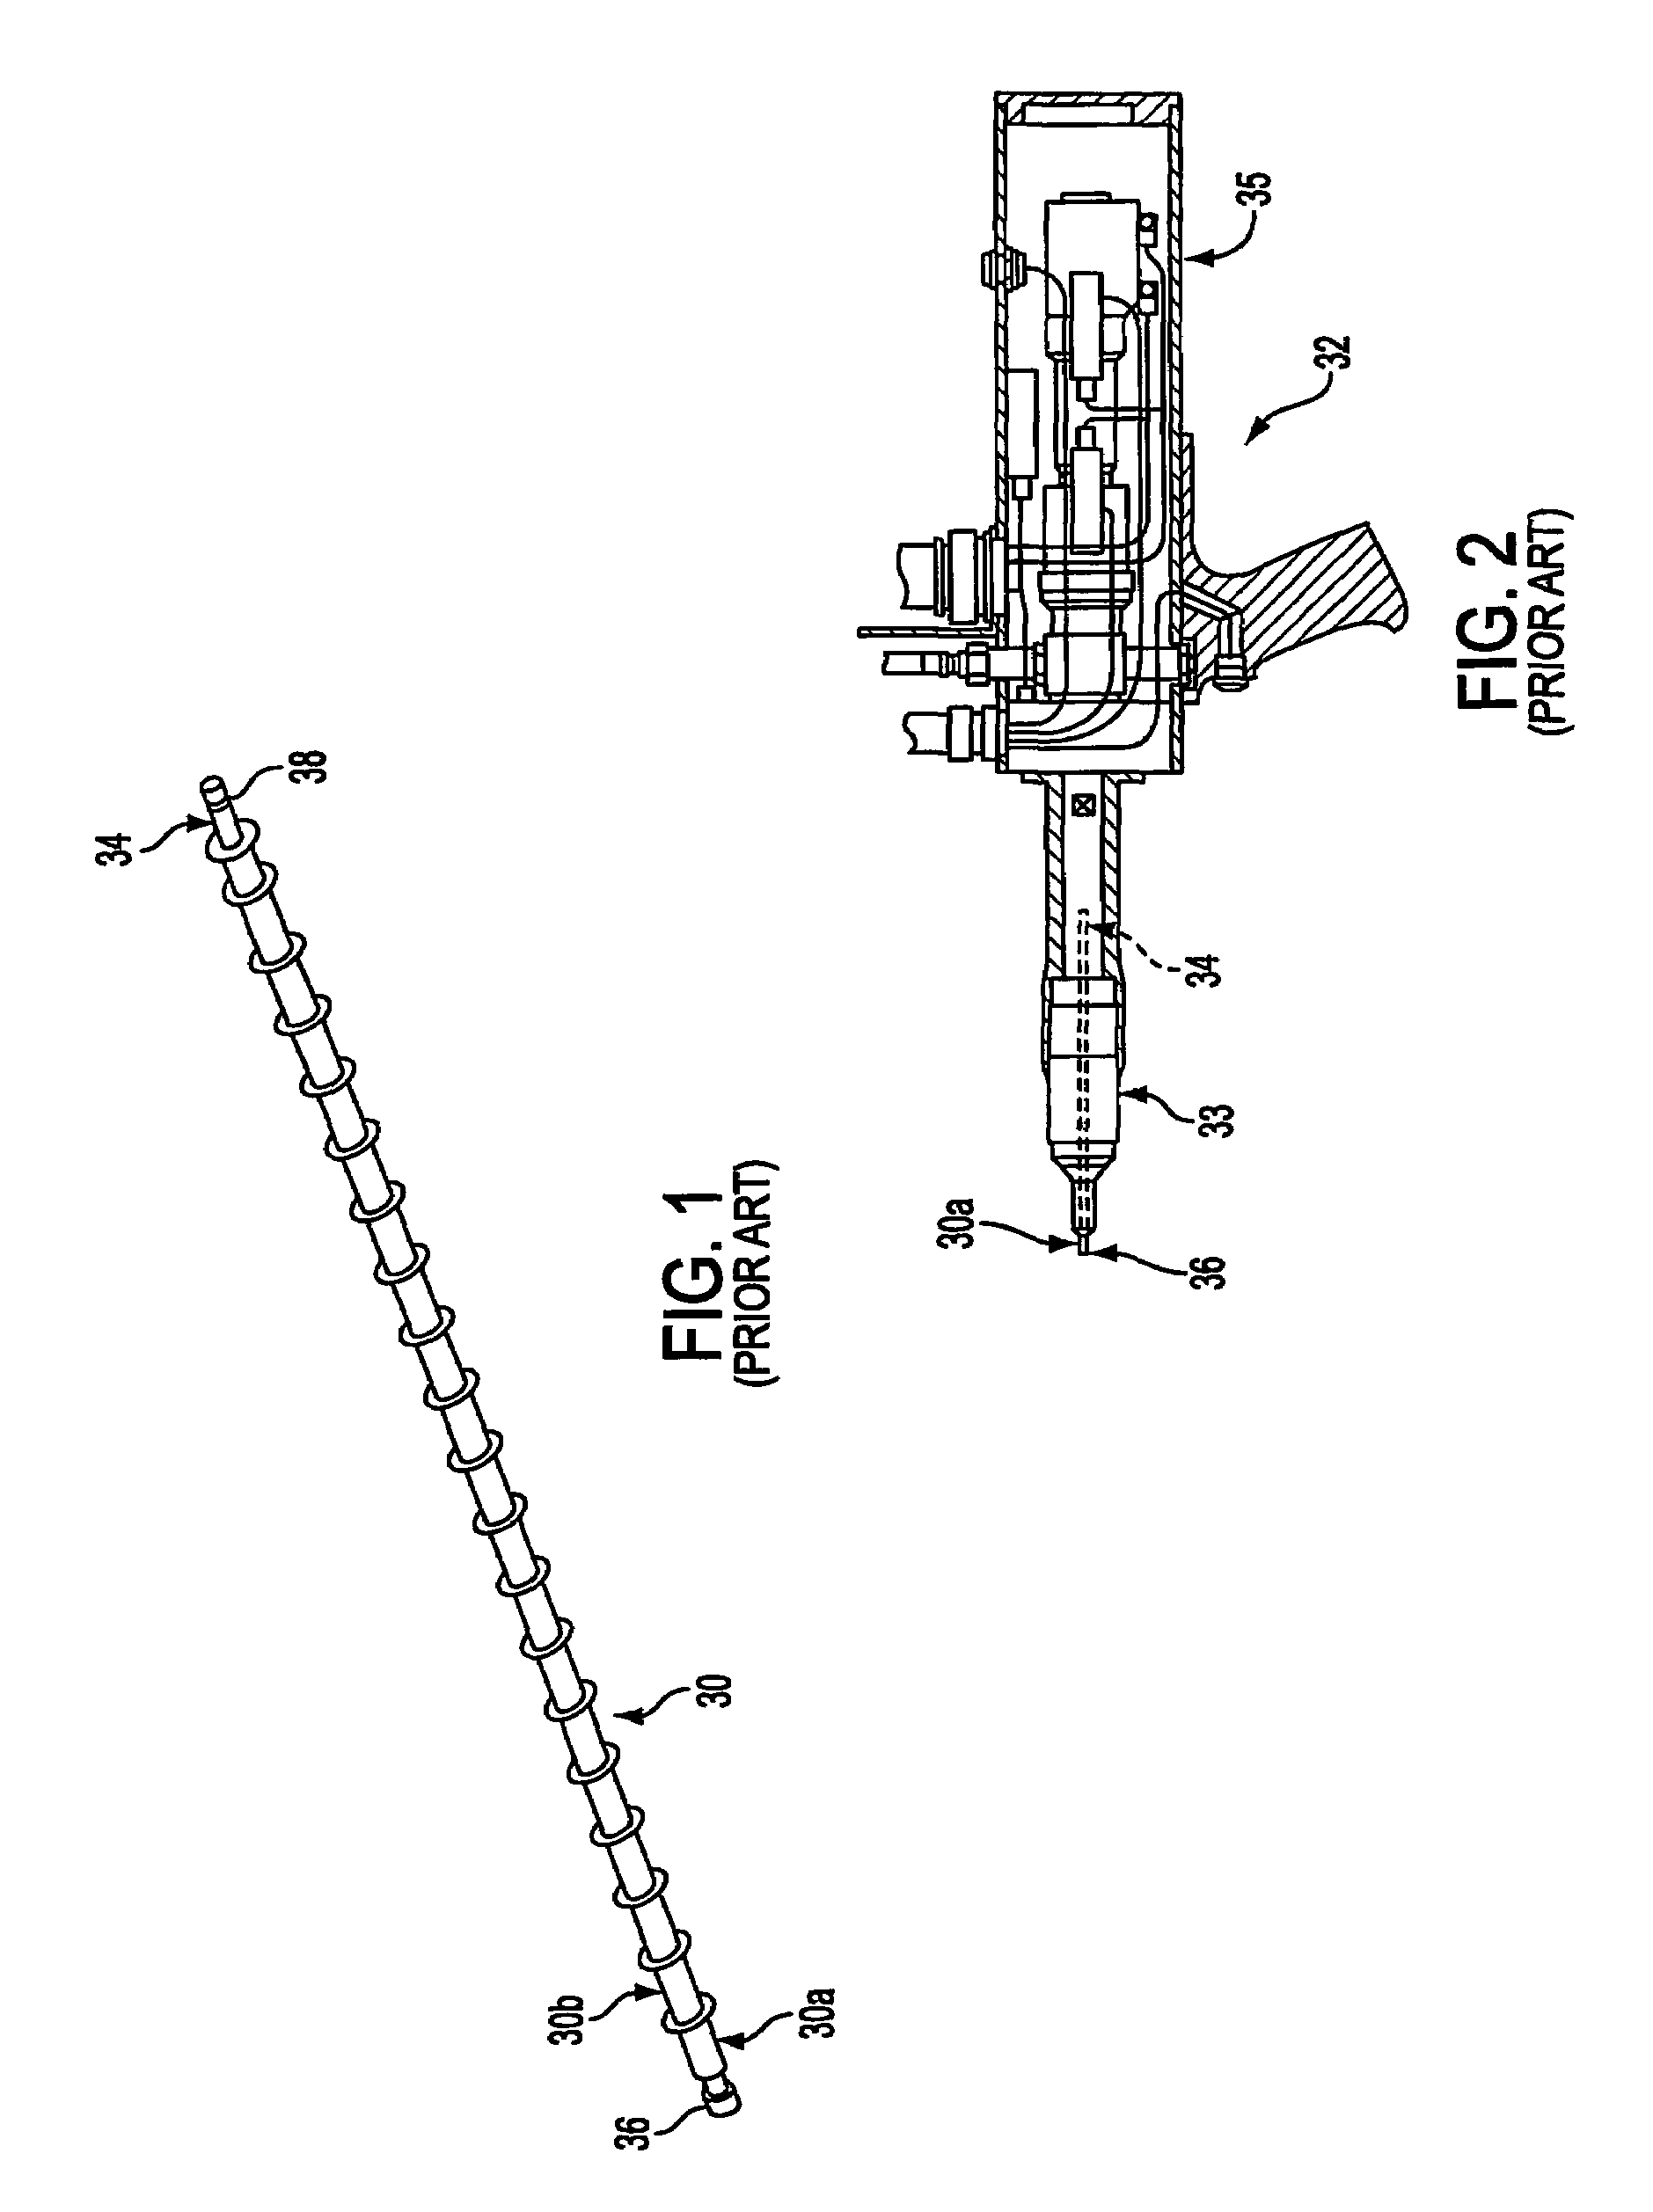 Self-drilling pull-through blind rivet and methods of and apparatus for the assembly and setting thereof